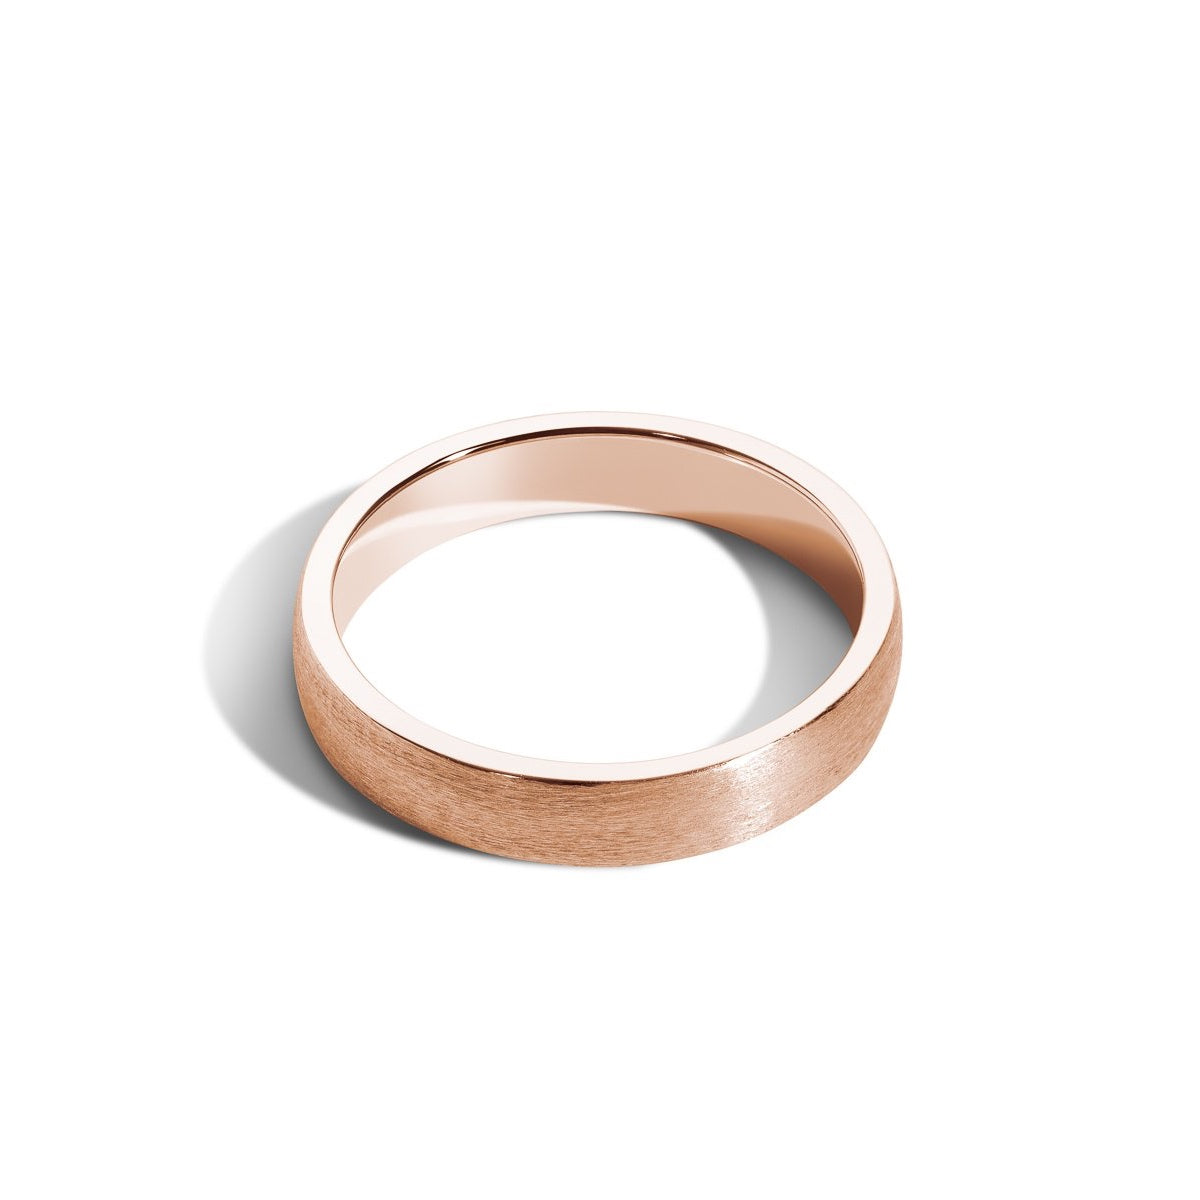 Shahla Karimi Jewelry Every Love Perfect 4mm Band 14K Rose Gold Matte Finish